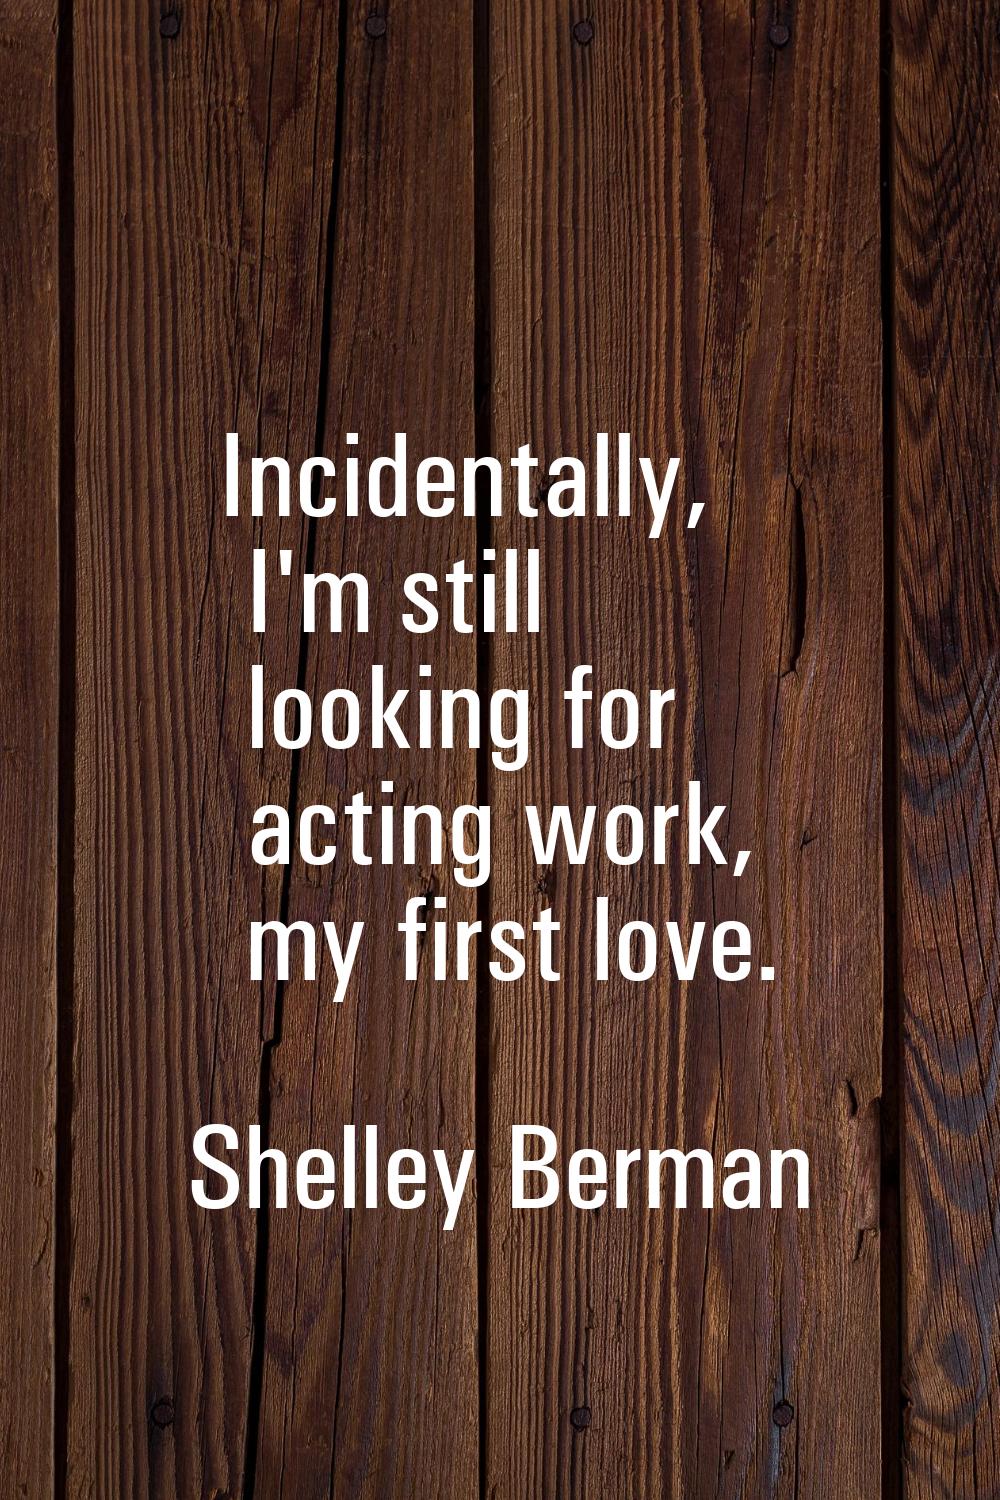 Incidentally, I'm still looking for acting work, my first love.